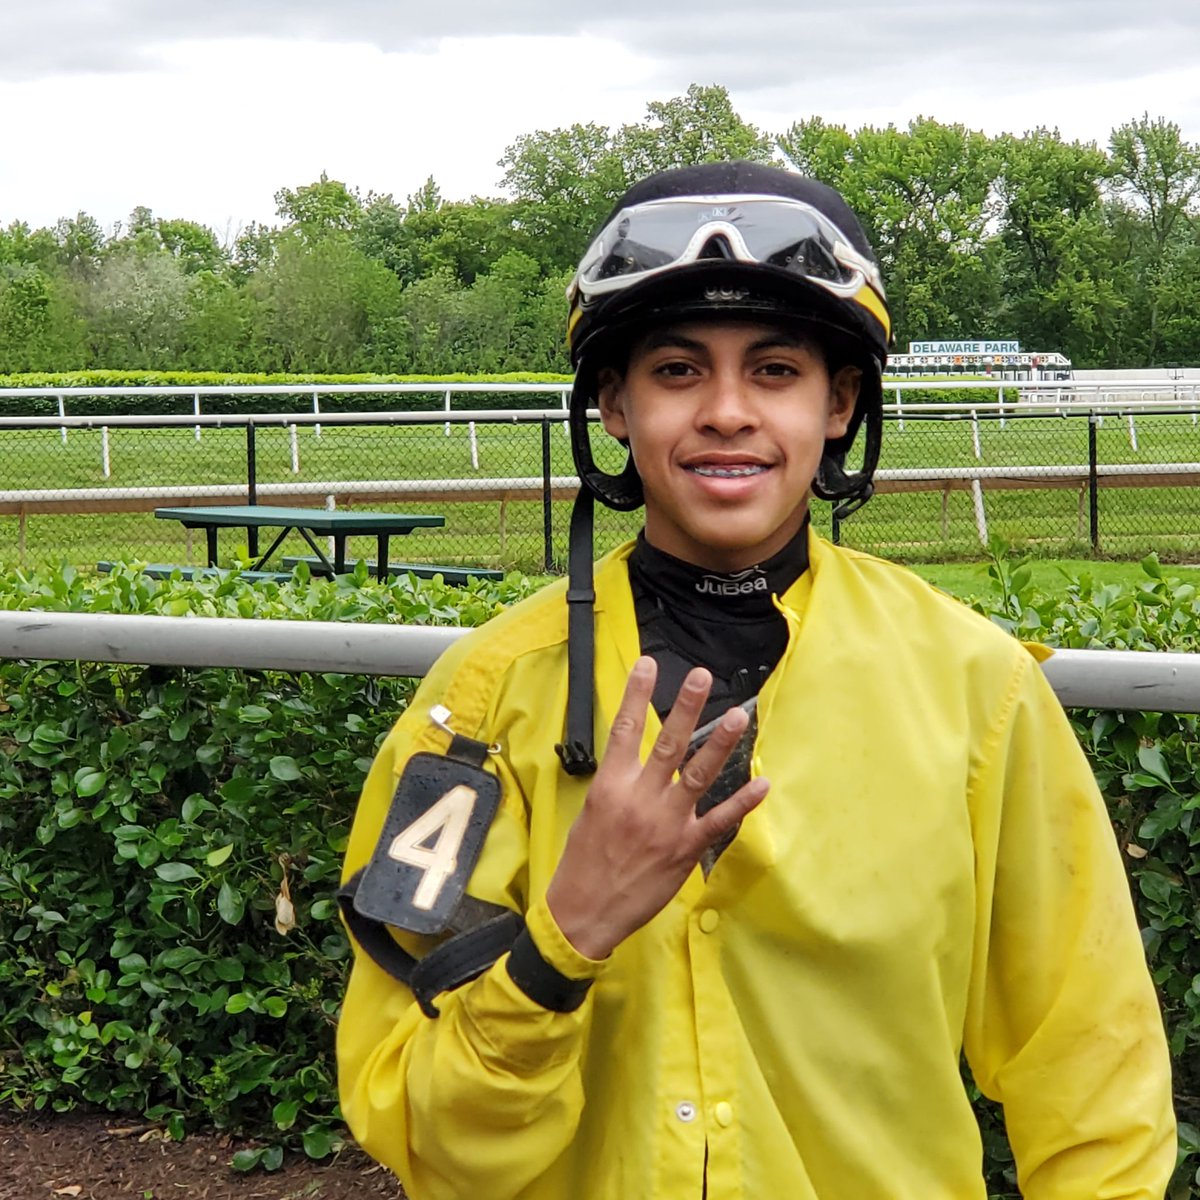 16 year old jockey Ederik Robles watches the replay of 1 of his 4 wins today @DelParkRacing . @MasonnumberMark @StantonSalter